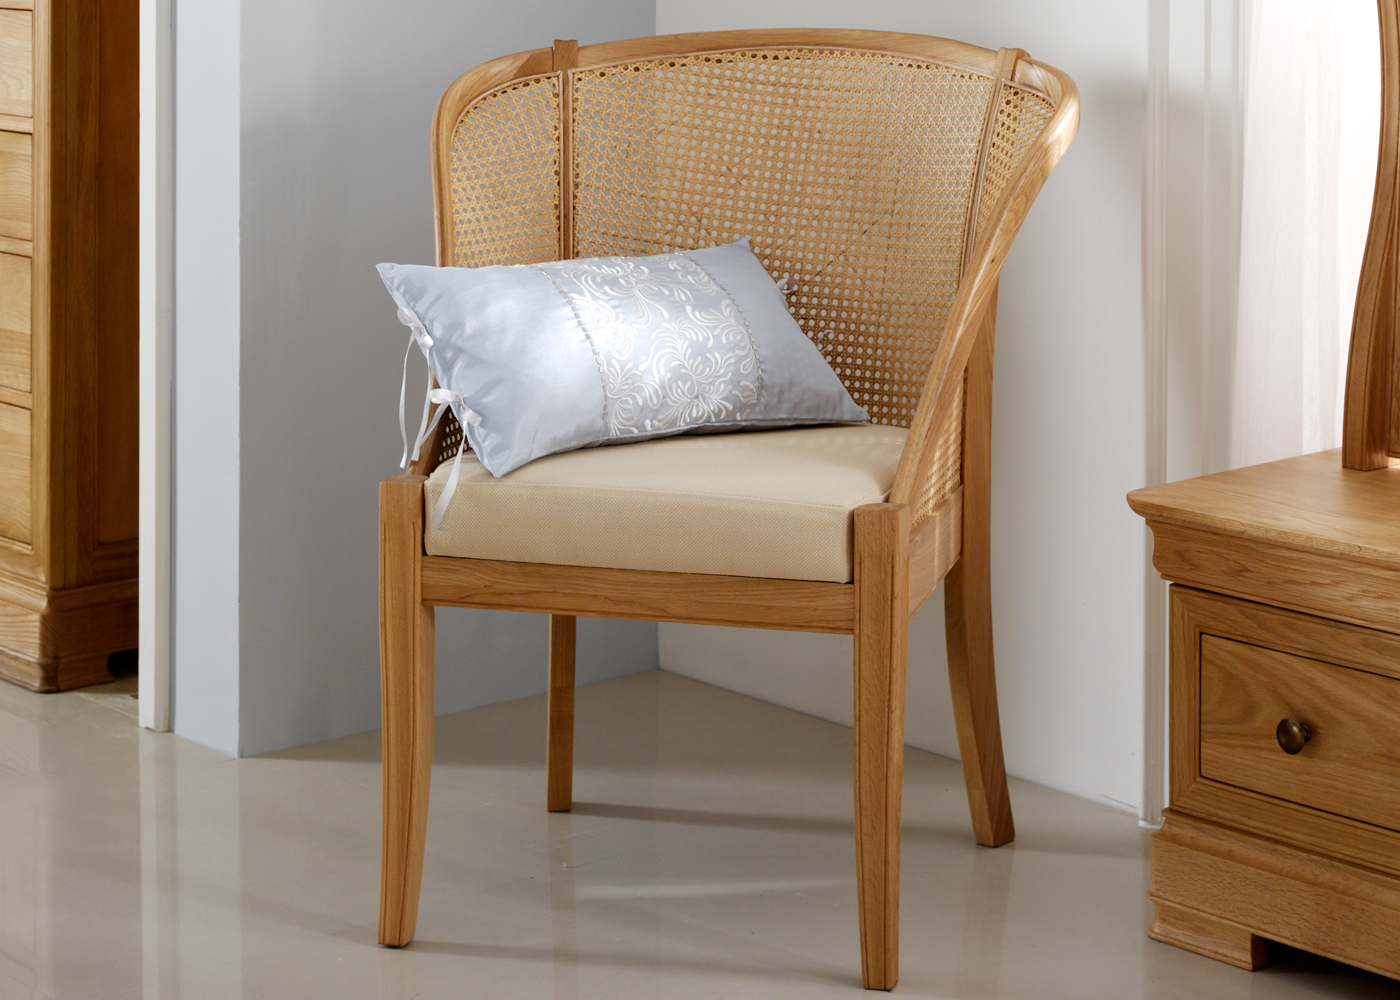 Decorative Chairs For Bedroom